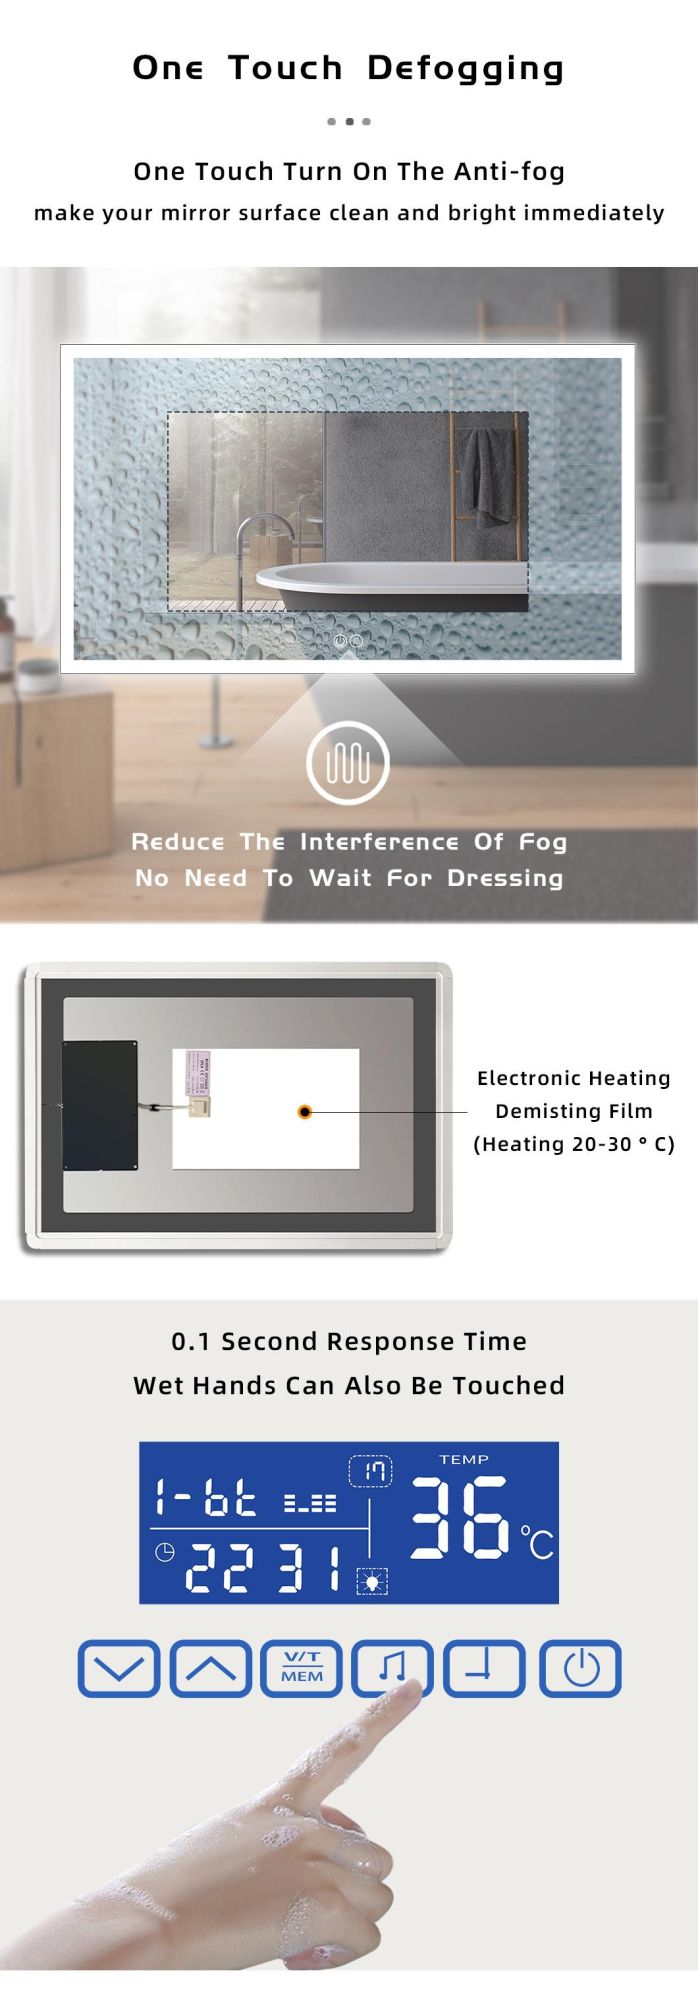 Music Mirror with Time Display Wall Mounted Bathroom Smart Mirror LED Lighted Bath Mirror Hot Sale Hotel Luxury Silver Glass